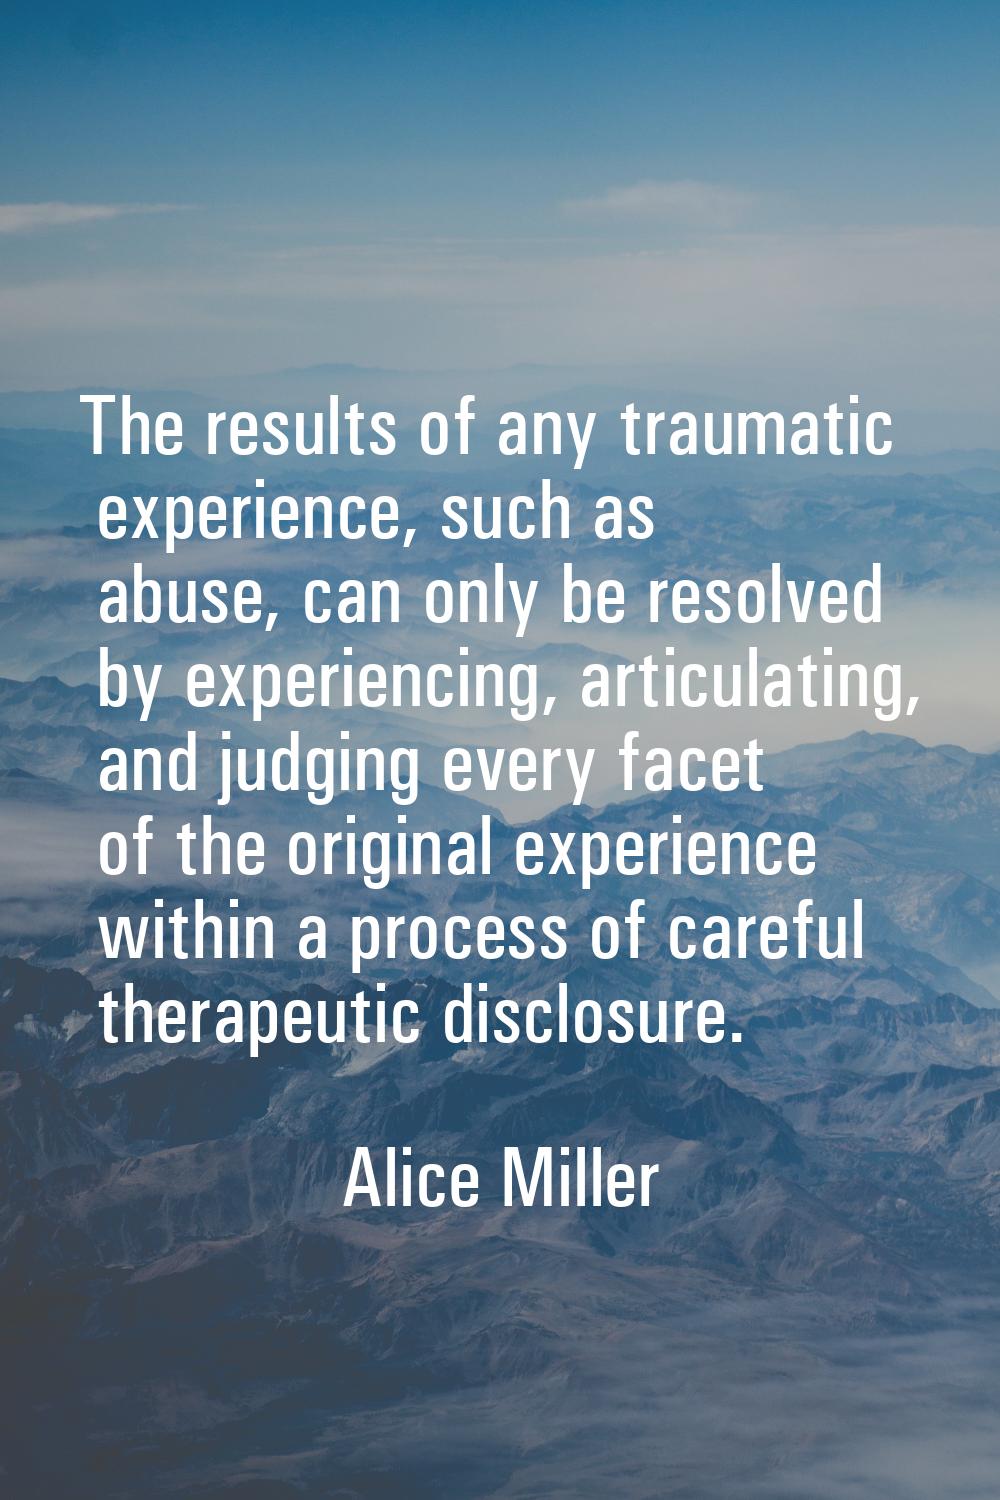 The results of any traumatic experience, such as abuse, can only be resolved by experiencing, artic